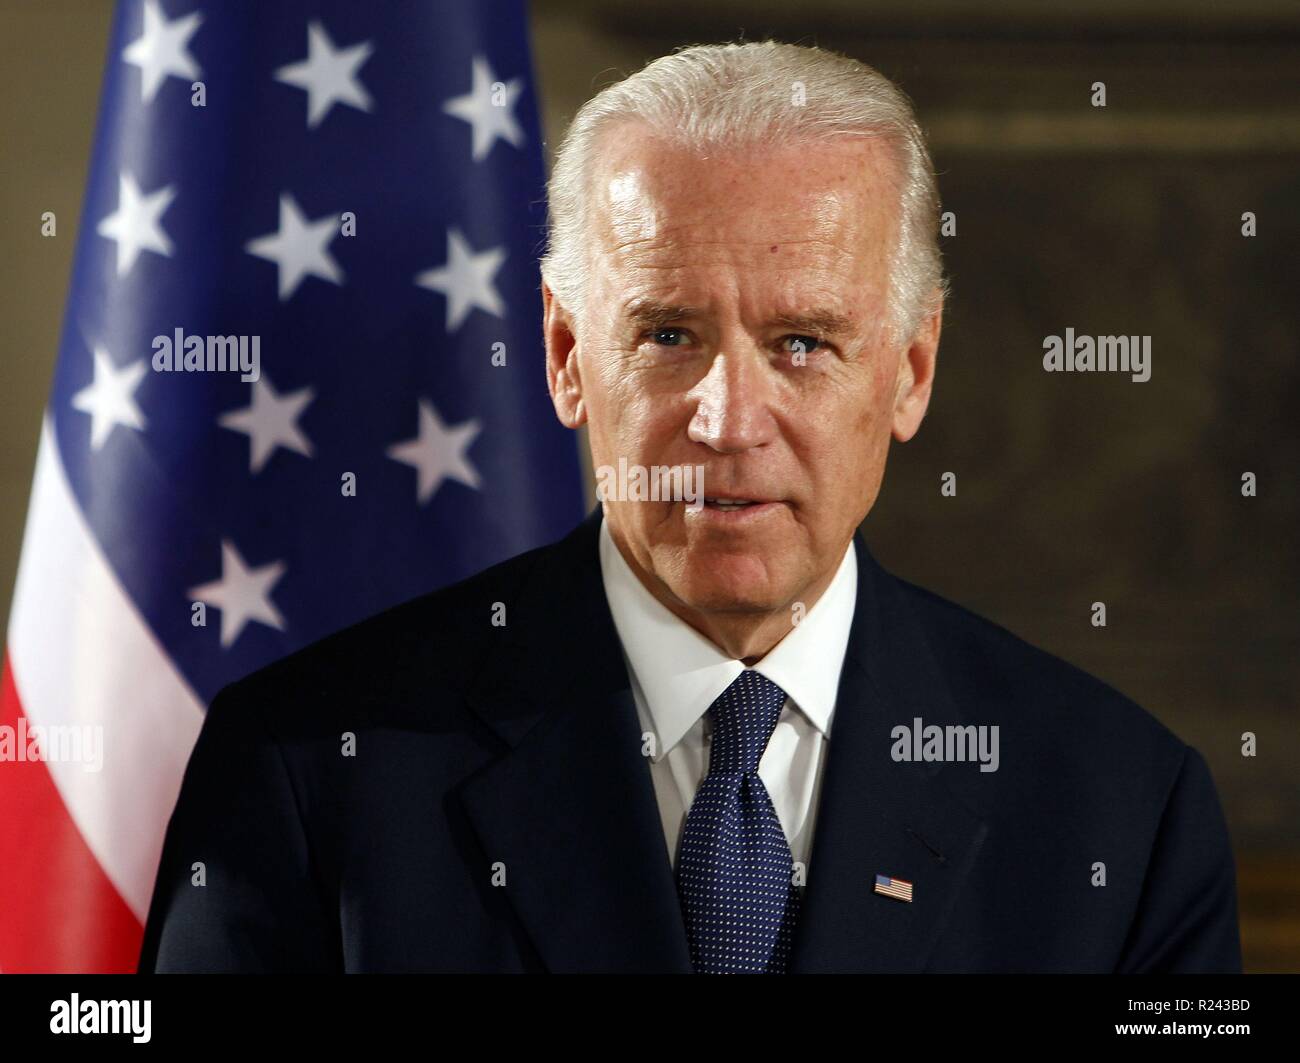 Joseph 'Joe' Biden, Jr. (born November 20, 1942) 47th and current Vice President of the United States since 2009. He is a member of the Democratic Party and was a United States Senator from Delaware from 1973 until 2009. Stock Photo